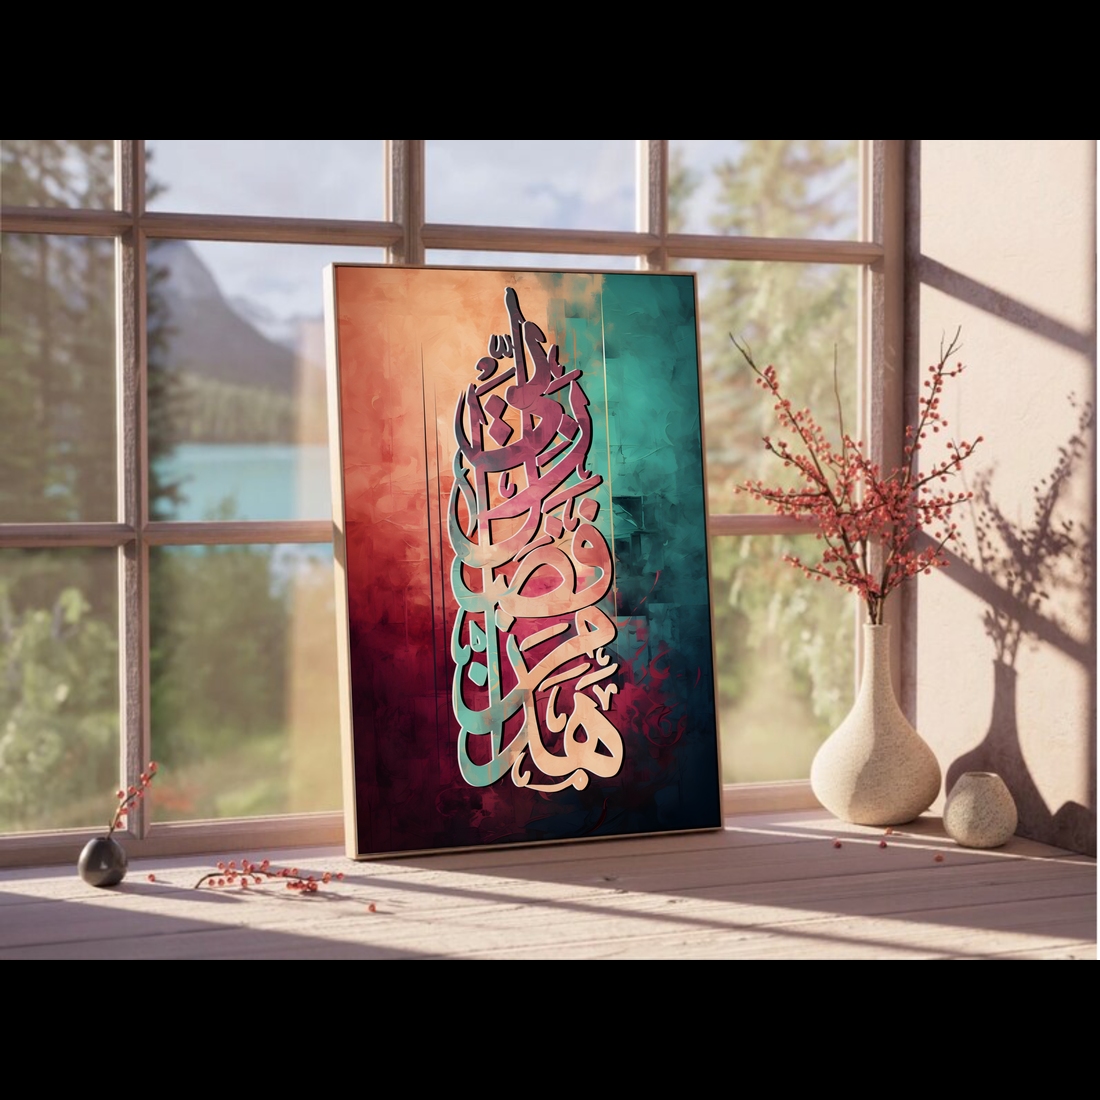 Calligraphic wall art cover image.